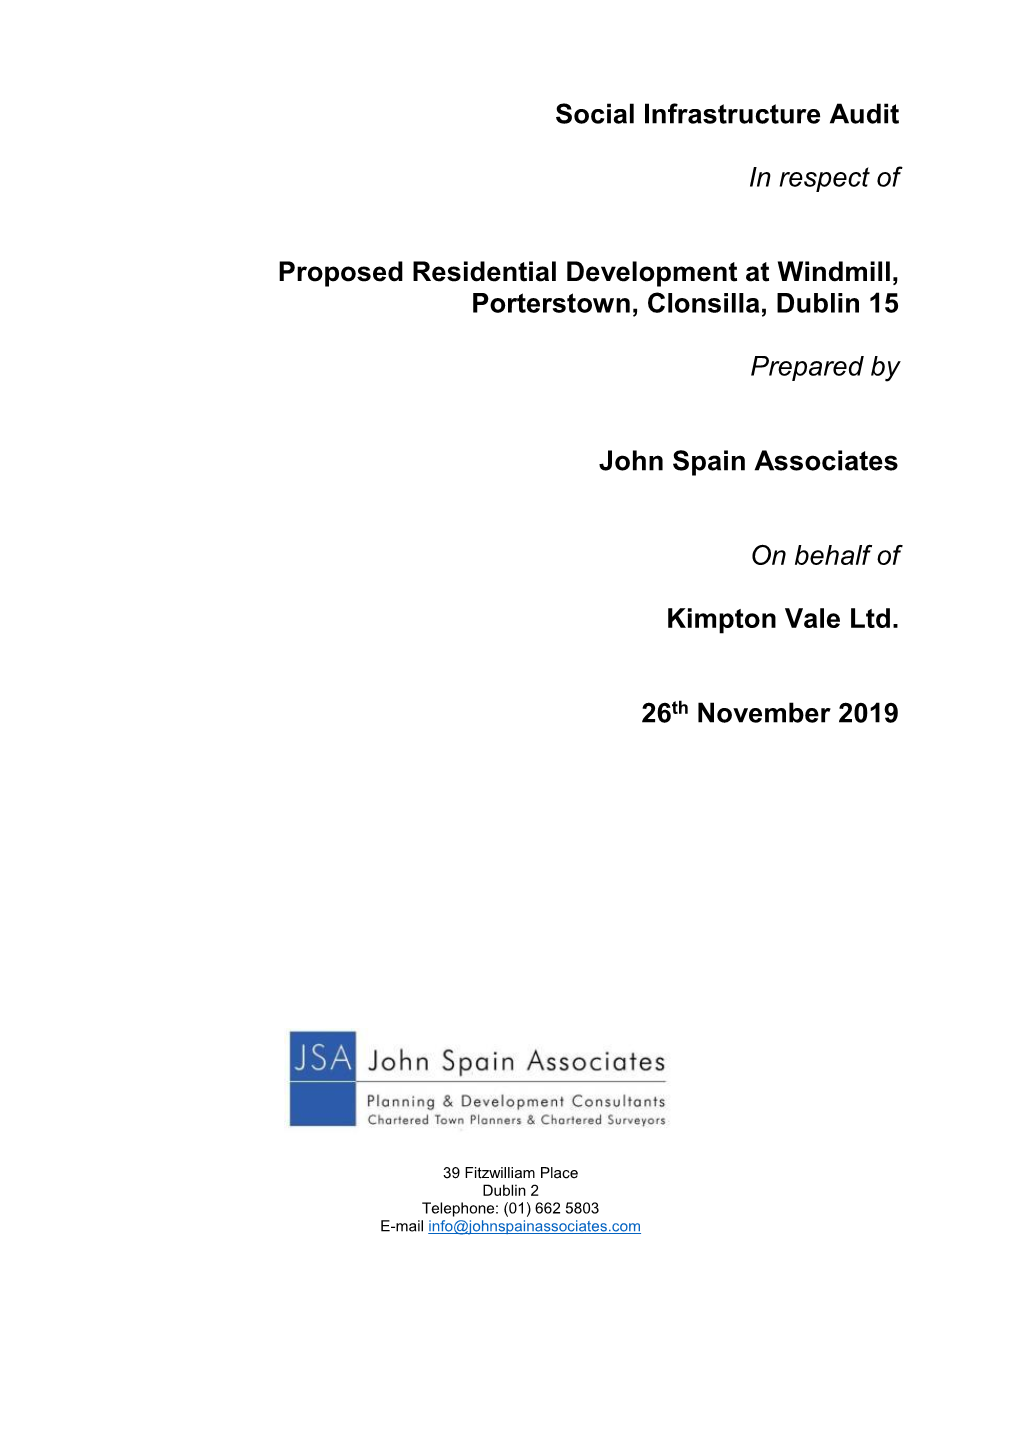 Social Infrastructure Audit in Respect of Proposed Residential